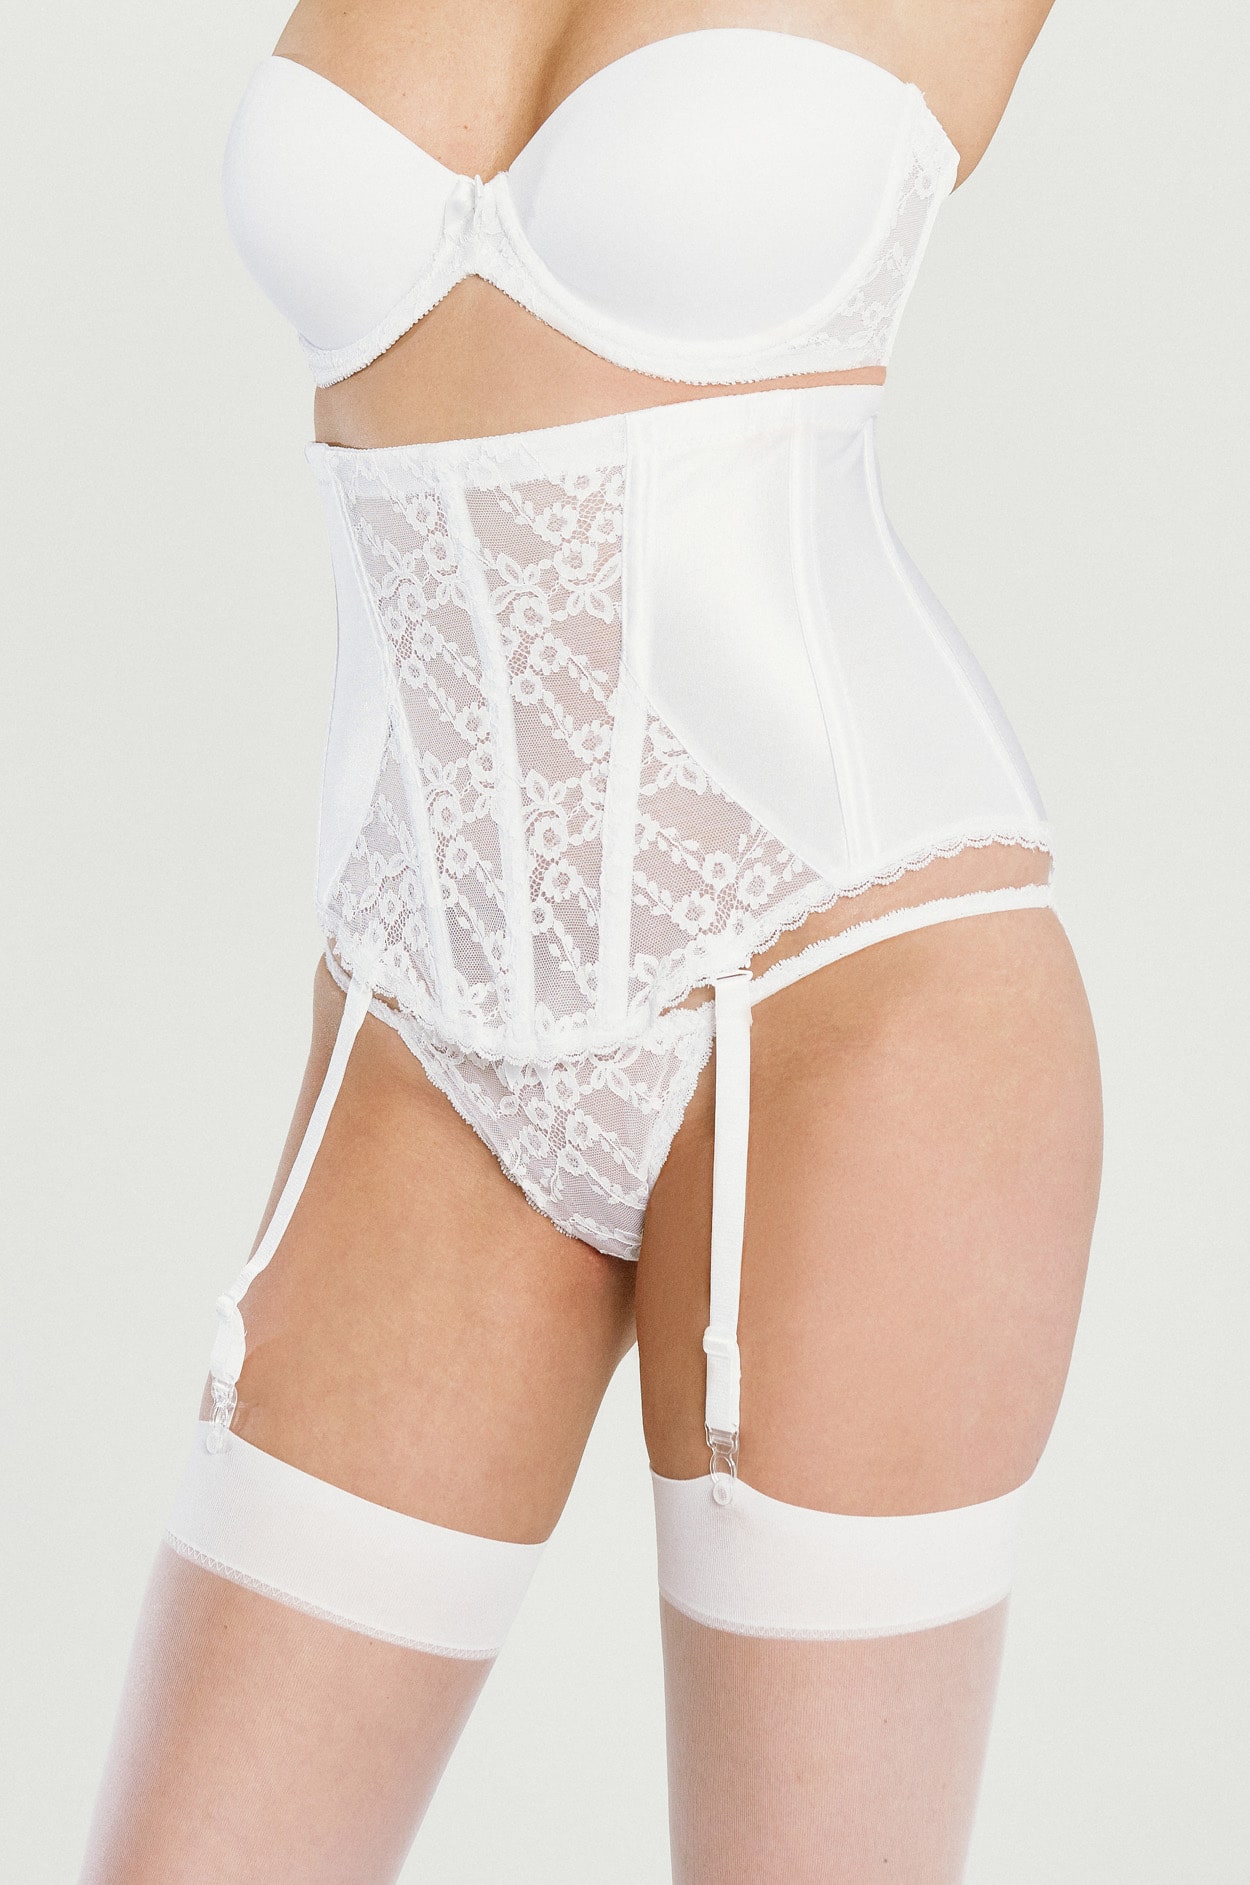 Victoriana - Victorian Lace Waist Cincher - Powdered and Waisted